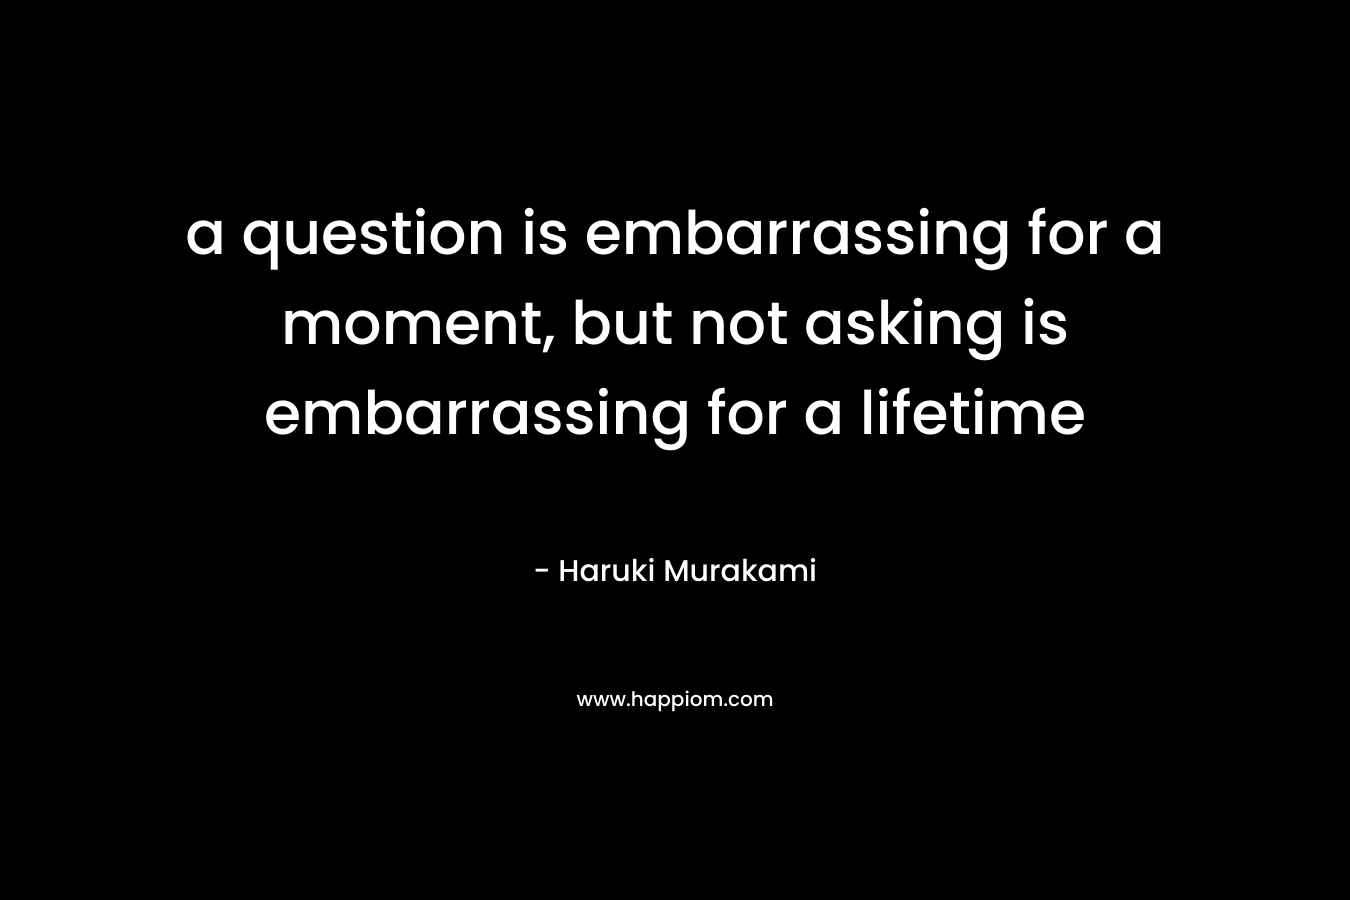 a question is embarrassing for a moment, but not asking is embarrassing for a lifetime